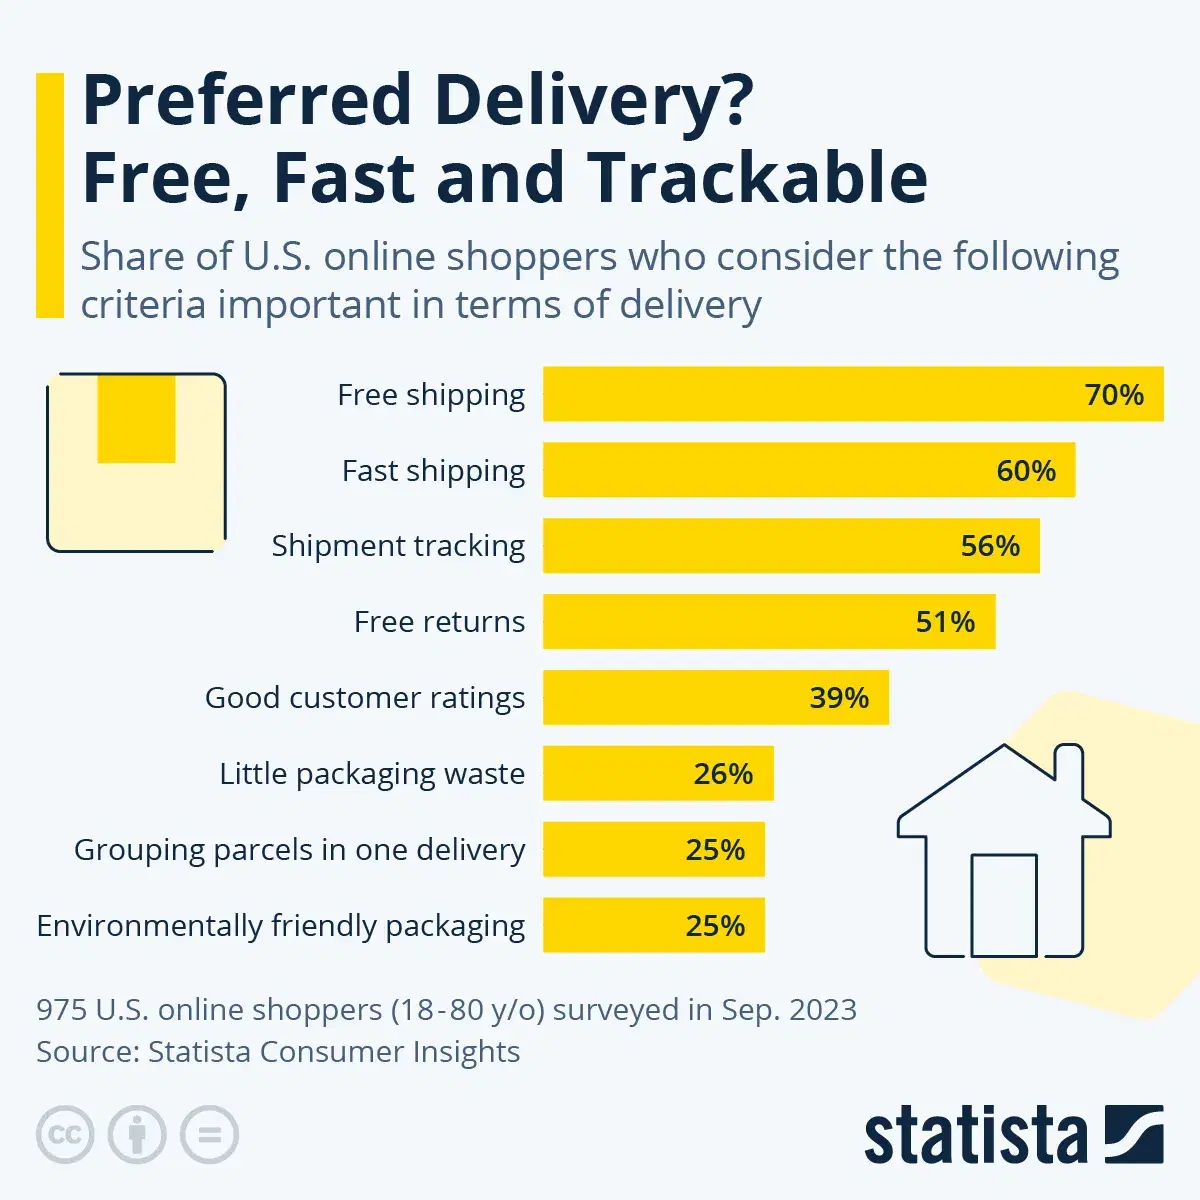 What Criteria Do Online Shoppers Value When it Comes to Shipping?